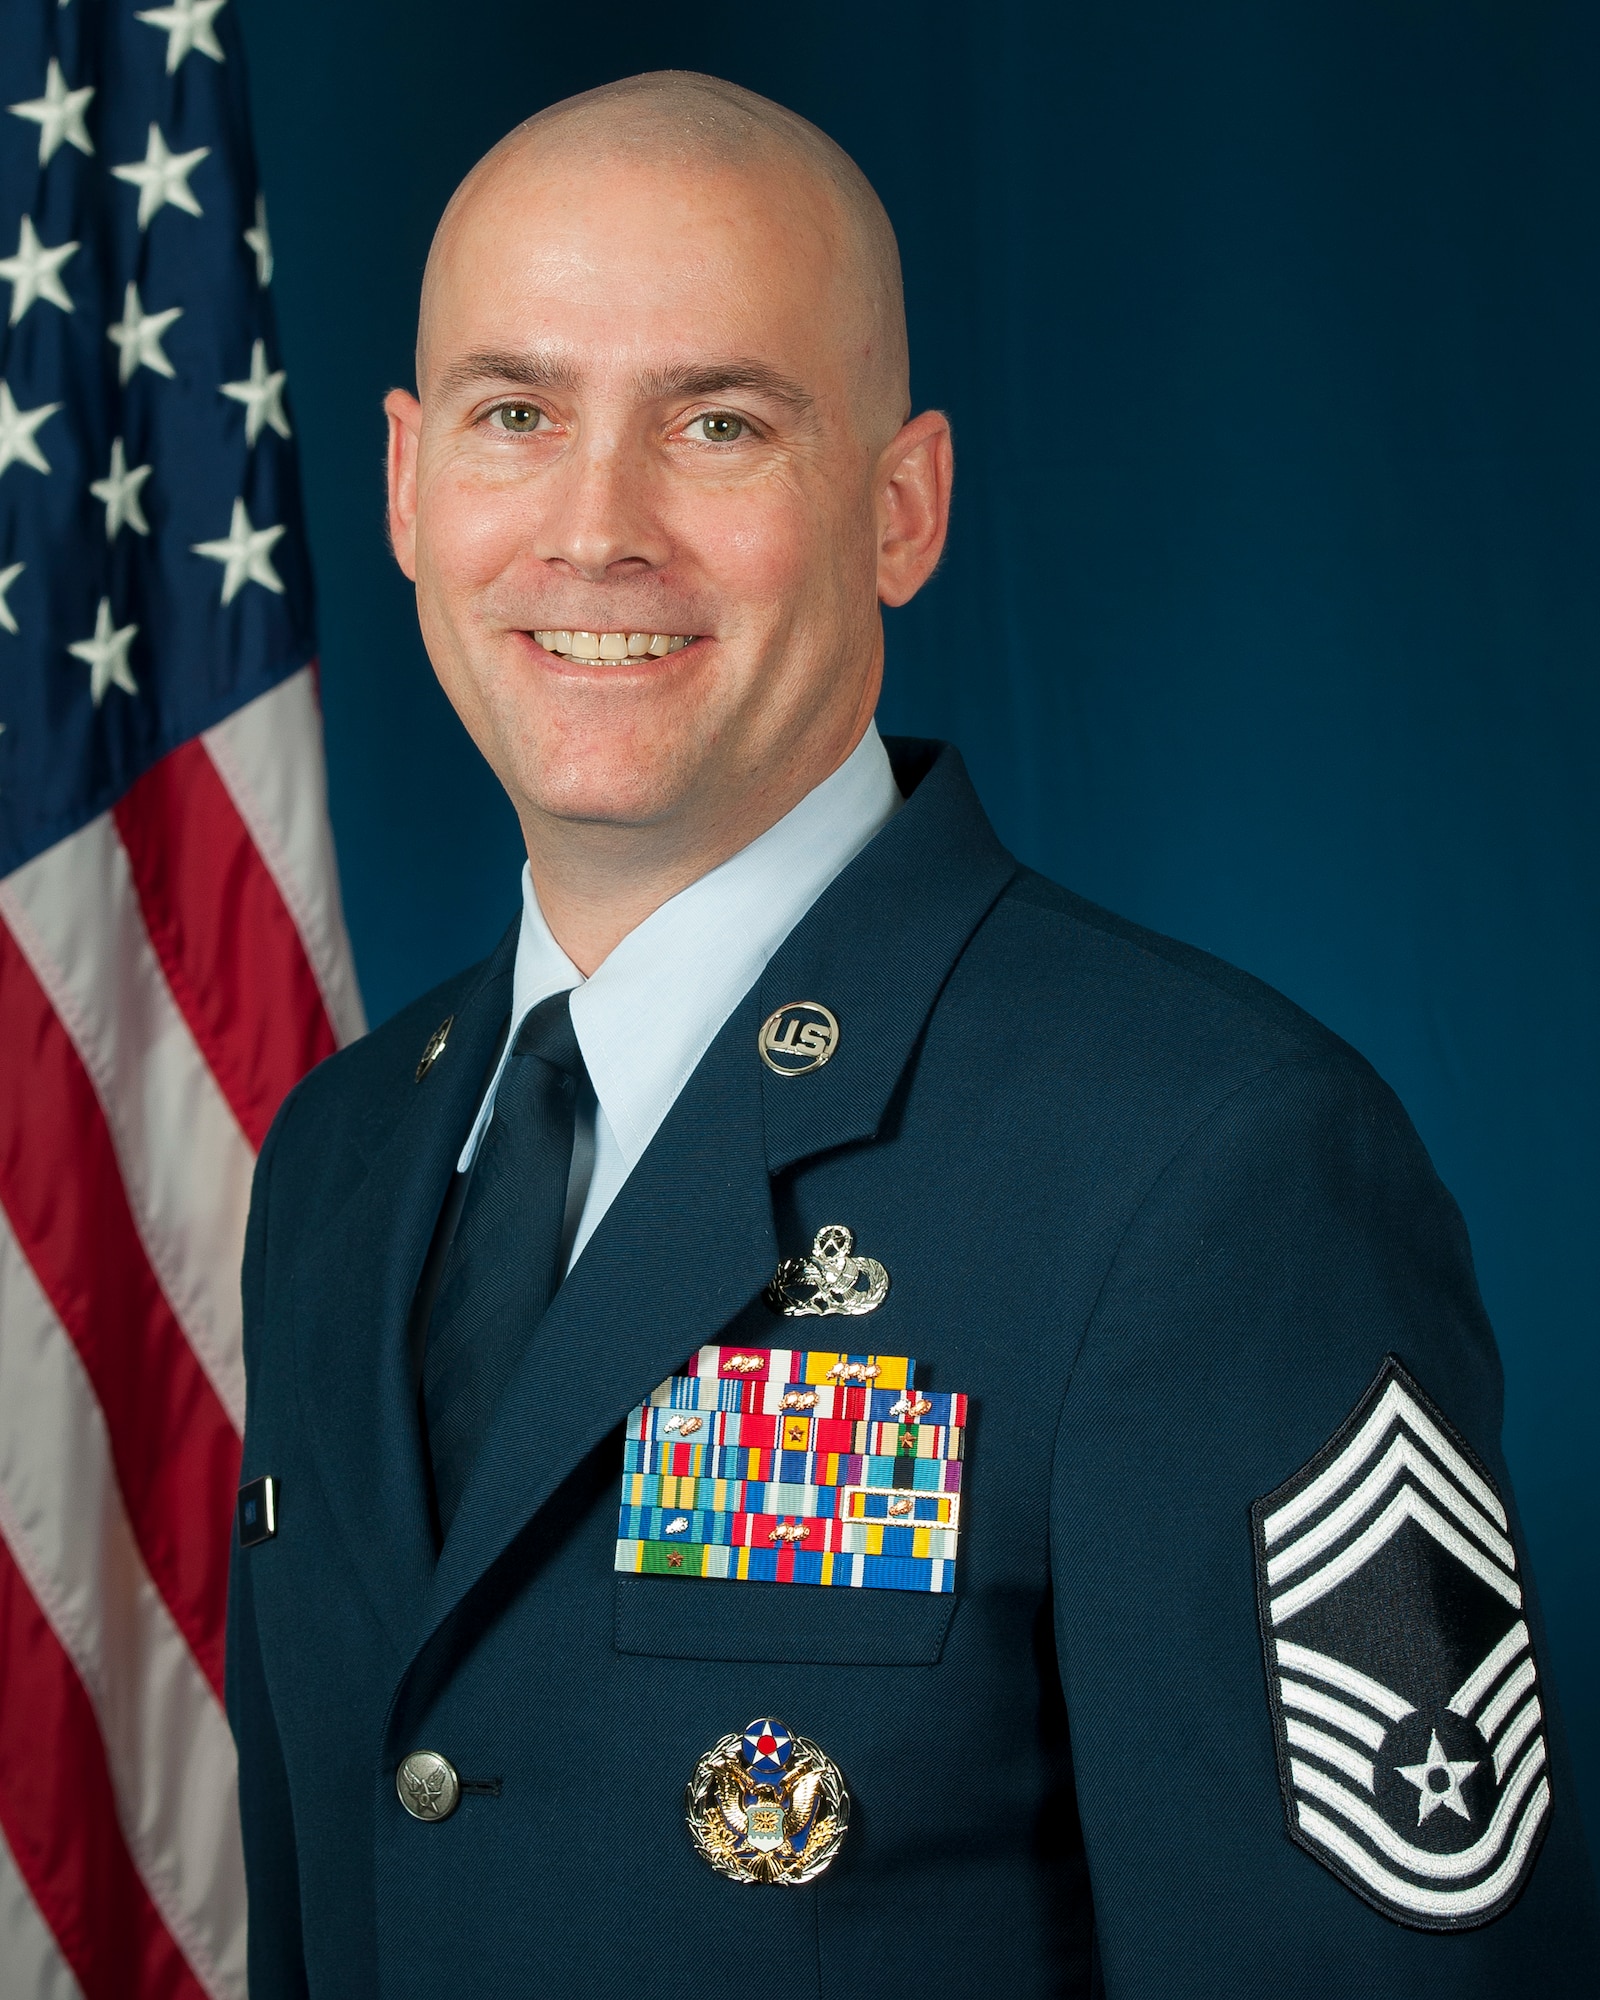 Chief Master Sgt. William Horay, Senior Enlisted Leadership Management Office manager, Nov. 30, 2015, Air National Guard Readiness Center, Joint Base Andrews, Md. Horay is the first active duty chief master sergeant assigned to the ANG command chief’s office. Horay will provide functional oversight, coordinate senior enlisted leader education opportunities and process nominations to key command positions. . (Air National Guard photo by Master Sgt. Marvin Preston/released)